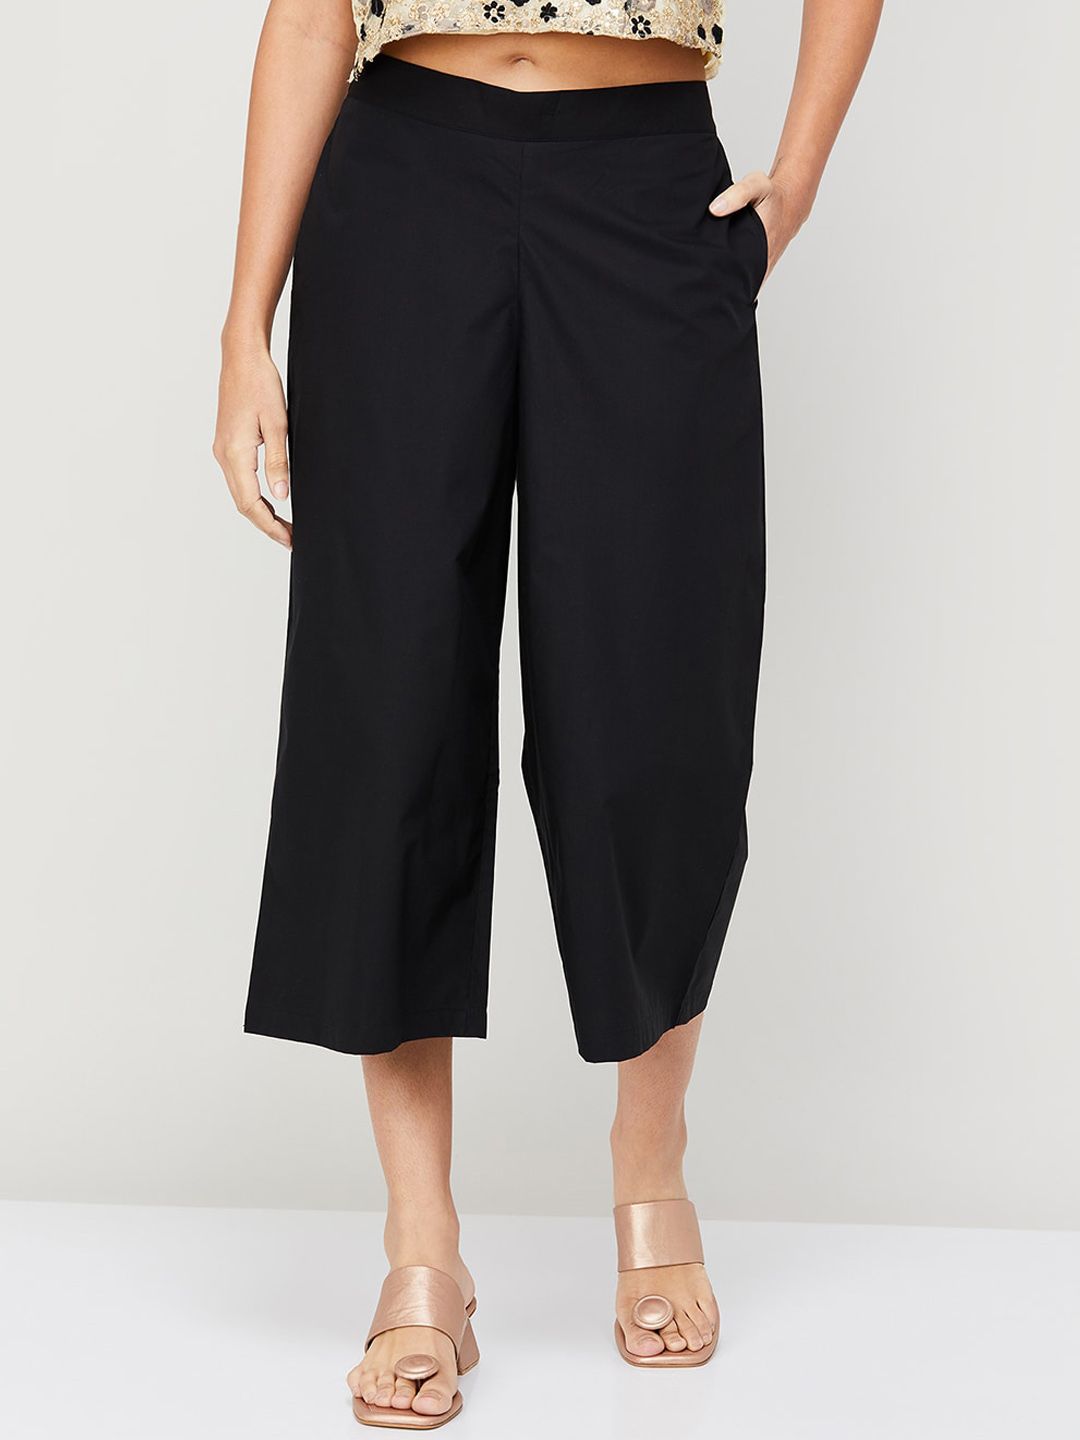 Melange by Lifestyle Women Mid-Rise Cotton Culottes Trousers Price in India